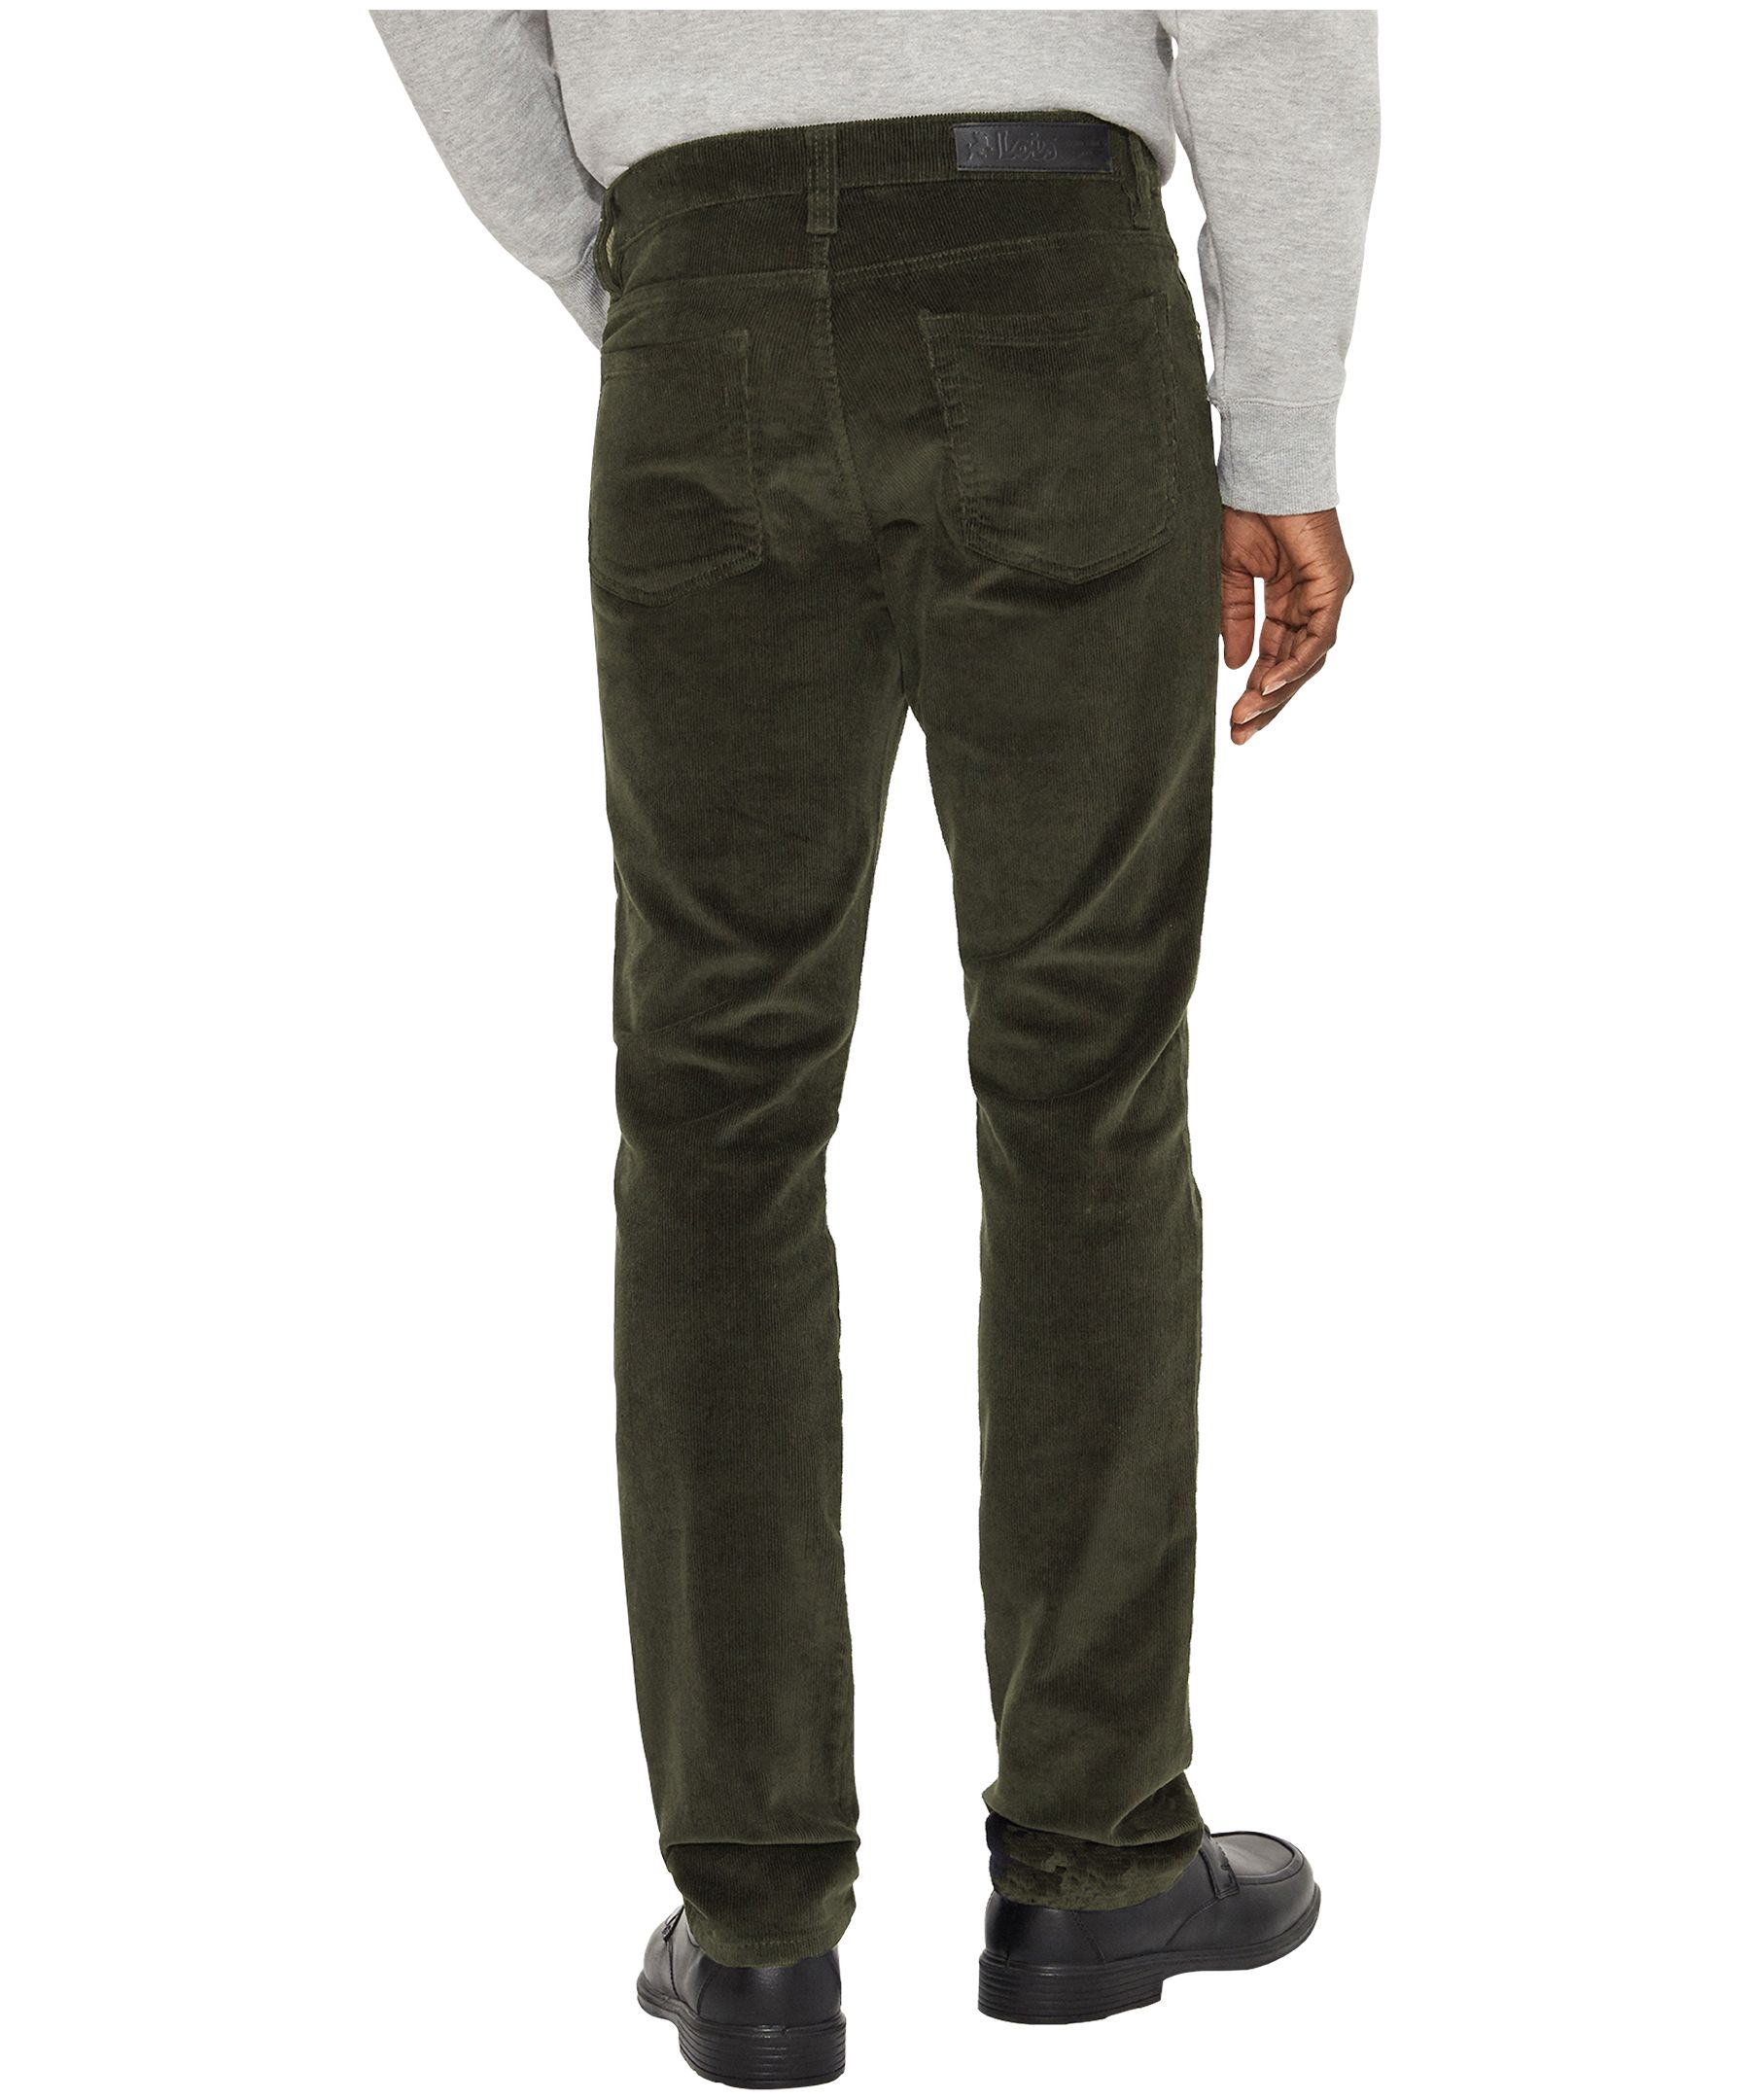 https://media-www.marks.com/product/marks-work-wearhouse/mens-world/mens-casual-pants/410033970681/lois-men-s-brad-slim-stretch-corduroy-jeans-forest-green-98104157-2483-4fd7-9095-67c290fe58ce-jpgrendition.jpg?imdensity=1&imwidth=1244&impolicy=mZoom